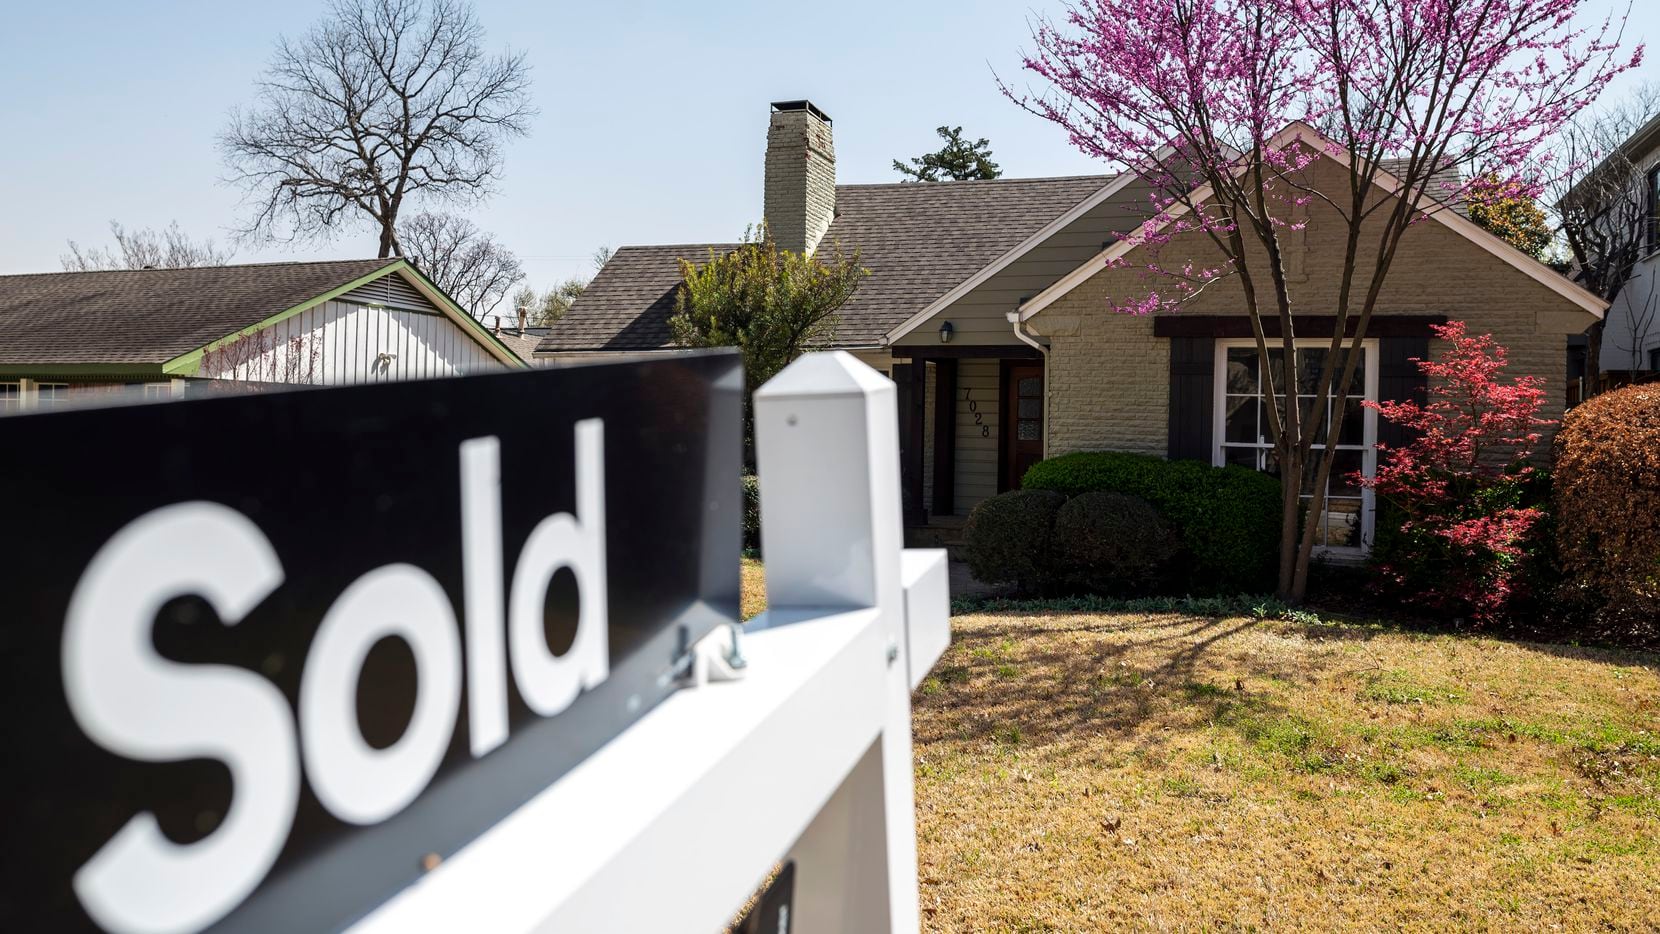 Median home sales prices in the D-FW area are at a record $341,000.